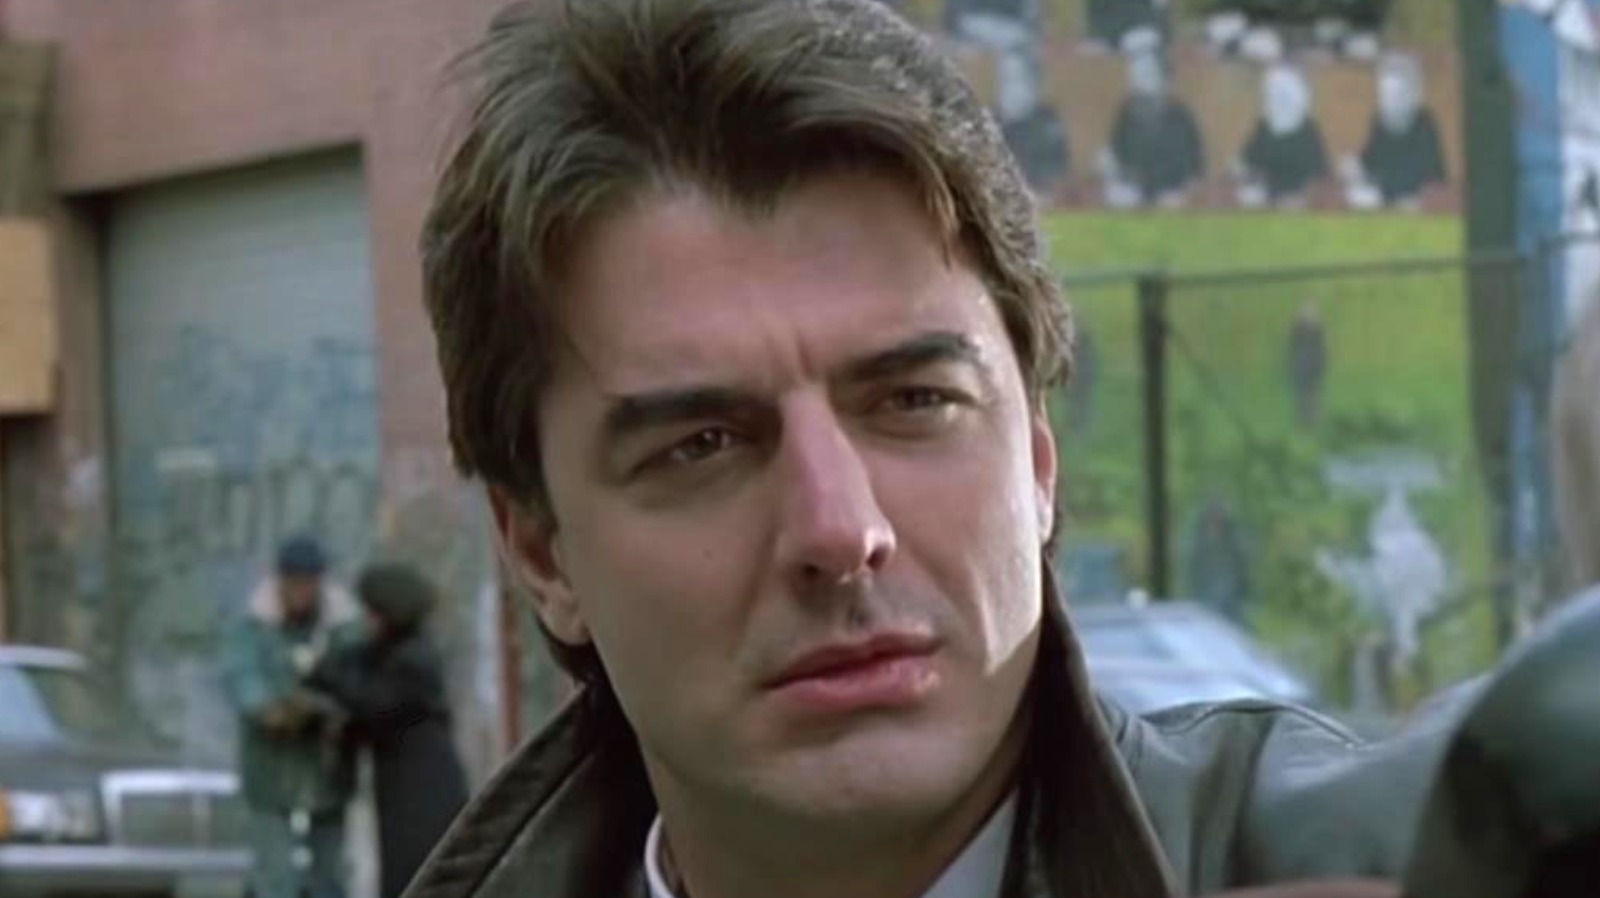 The Popular Actor Who Almost Beat Out Chris Noth For His Law & Order Role